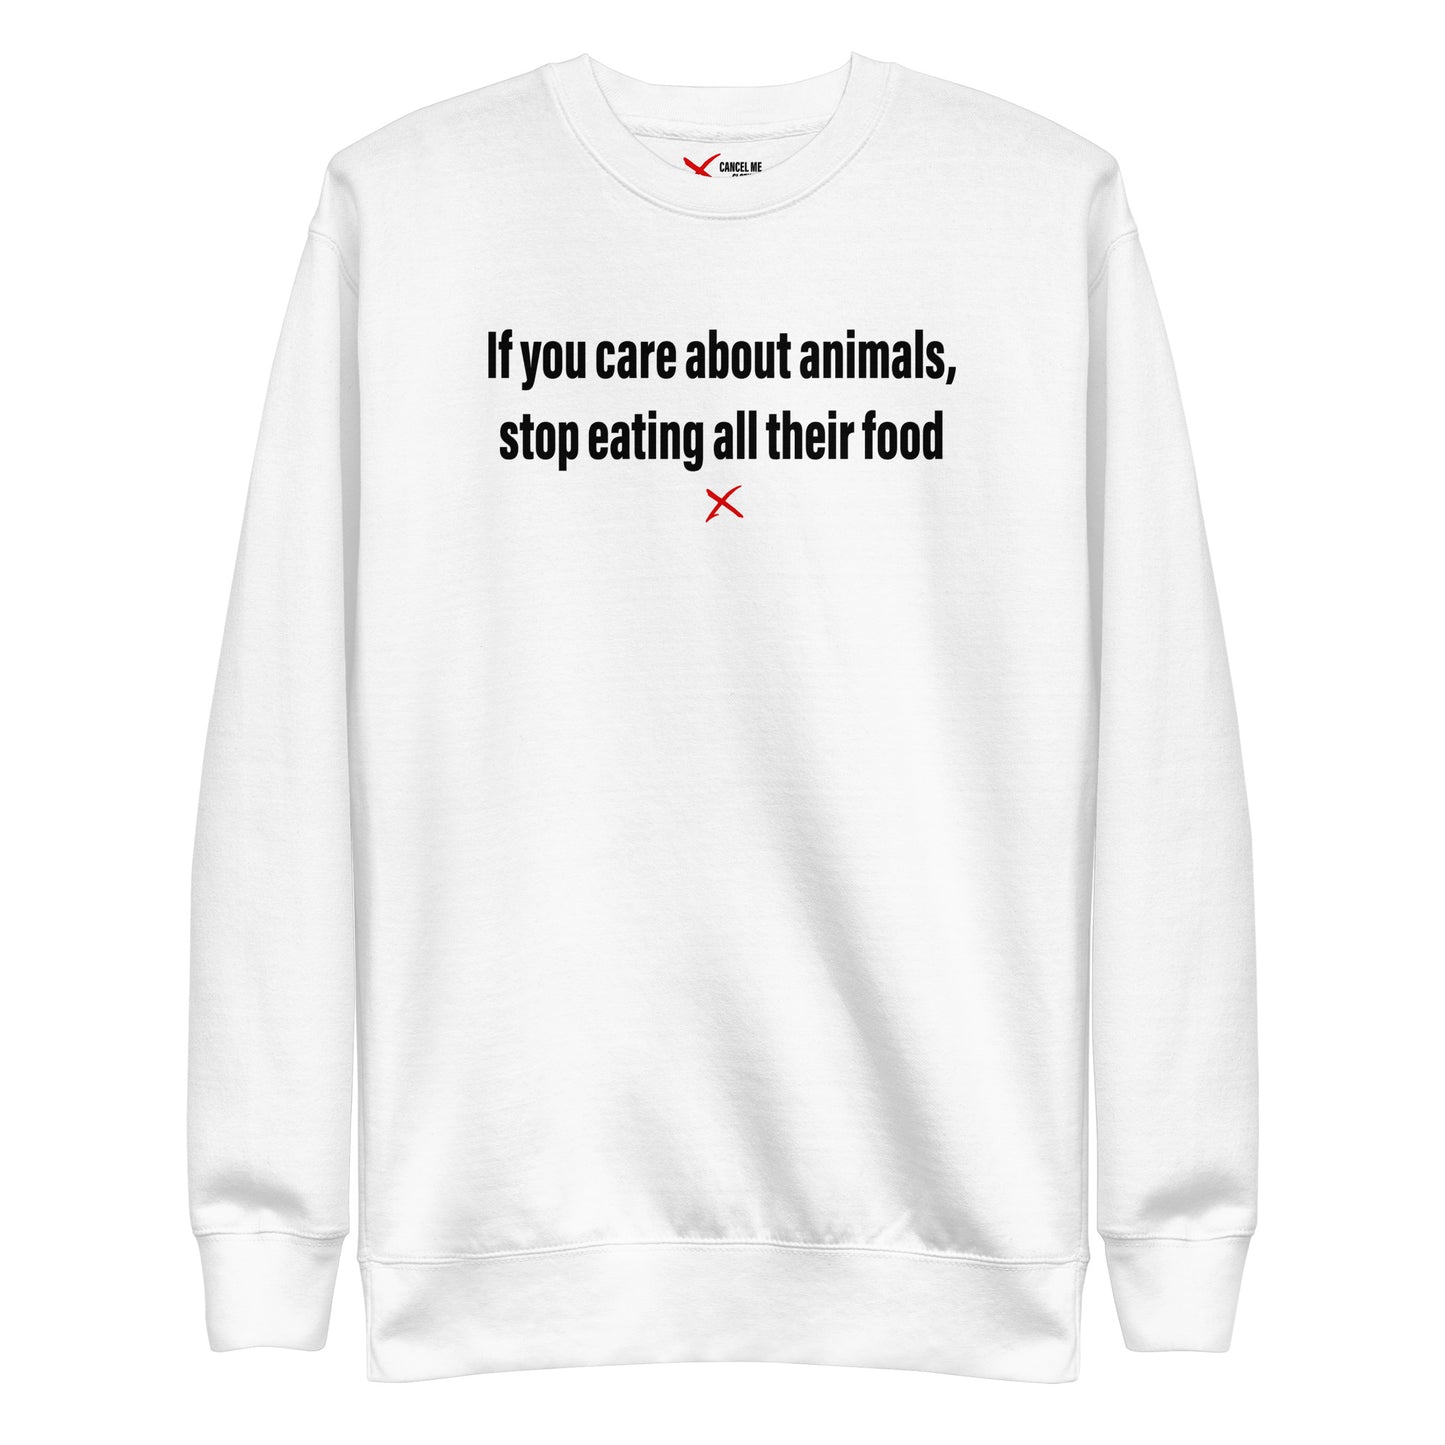 If you care about animals, stop eating all their food - Sweatshirt